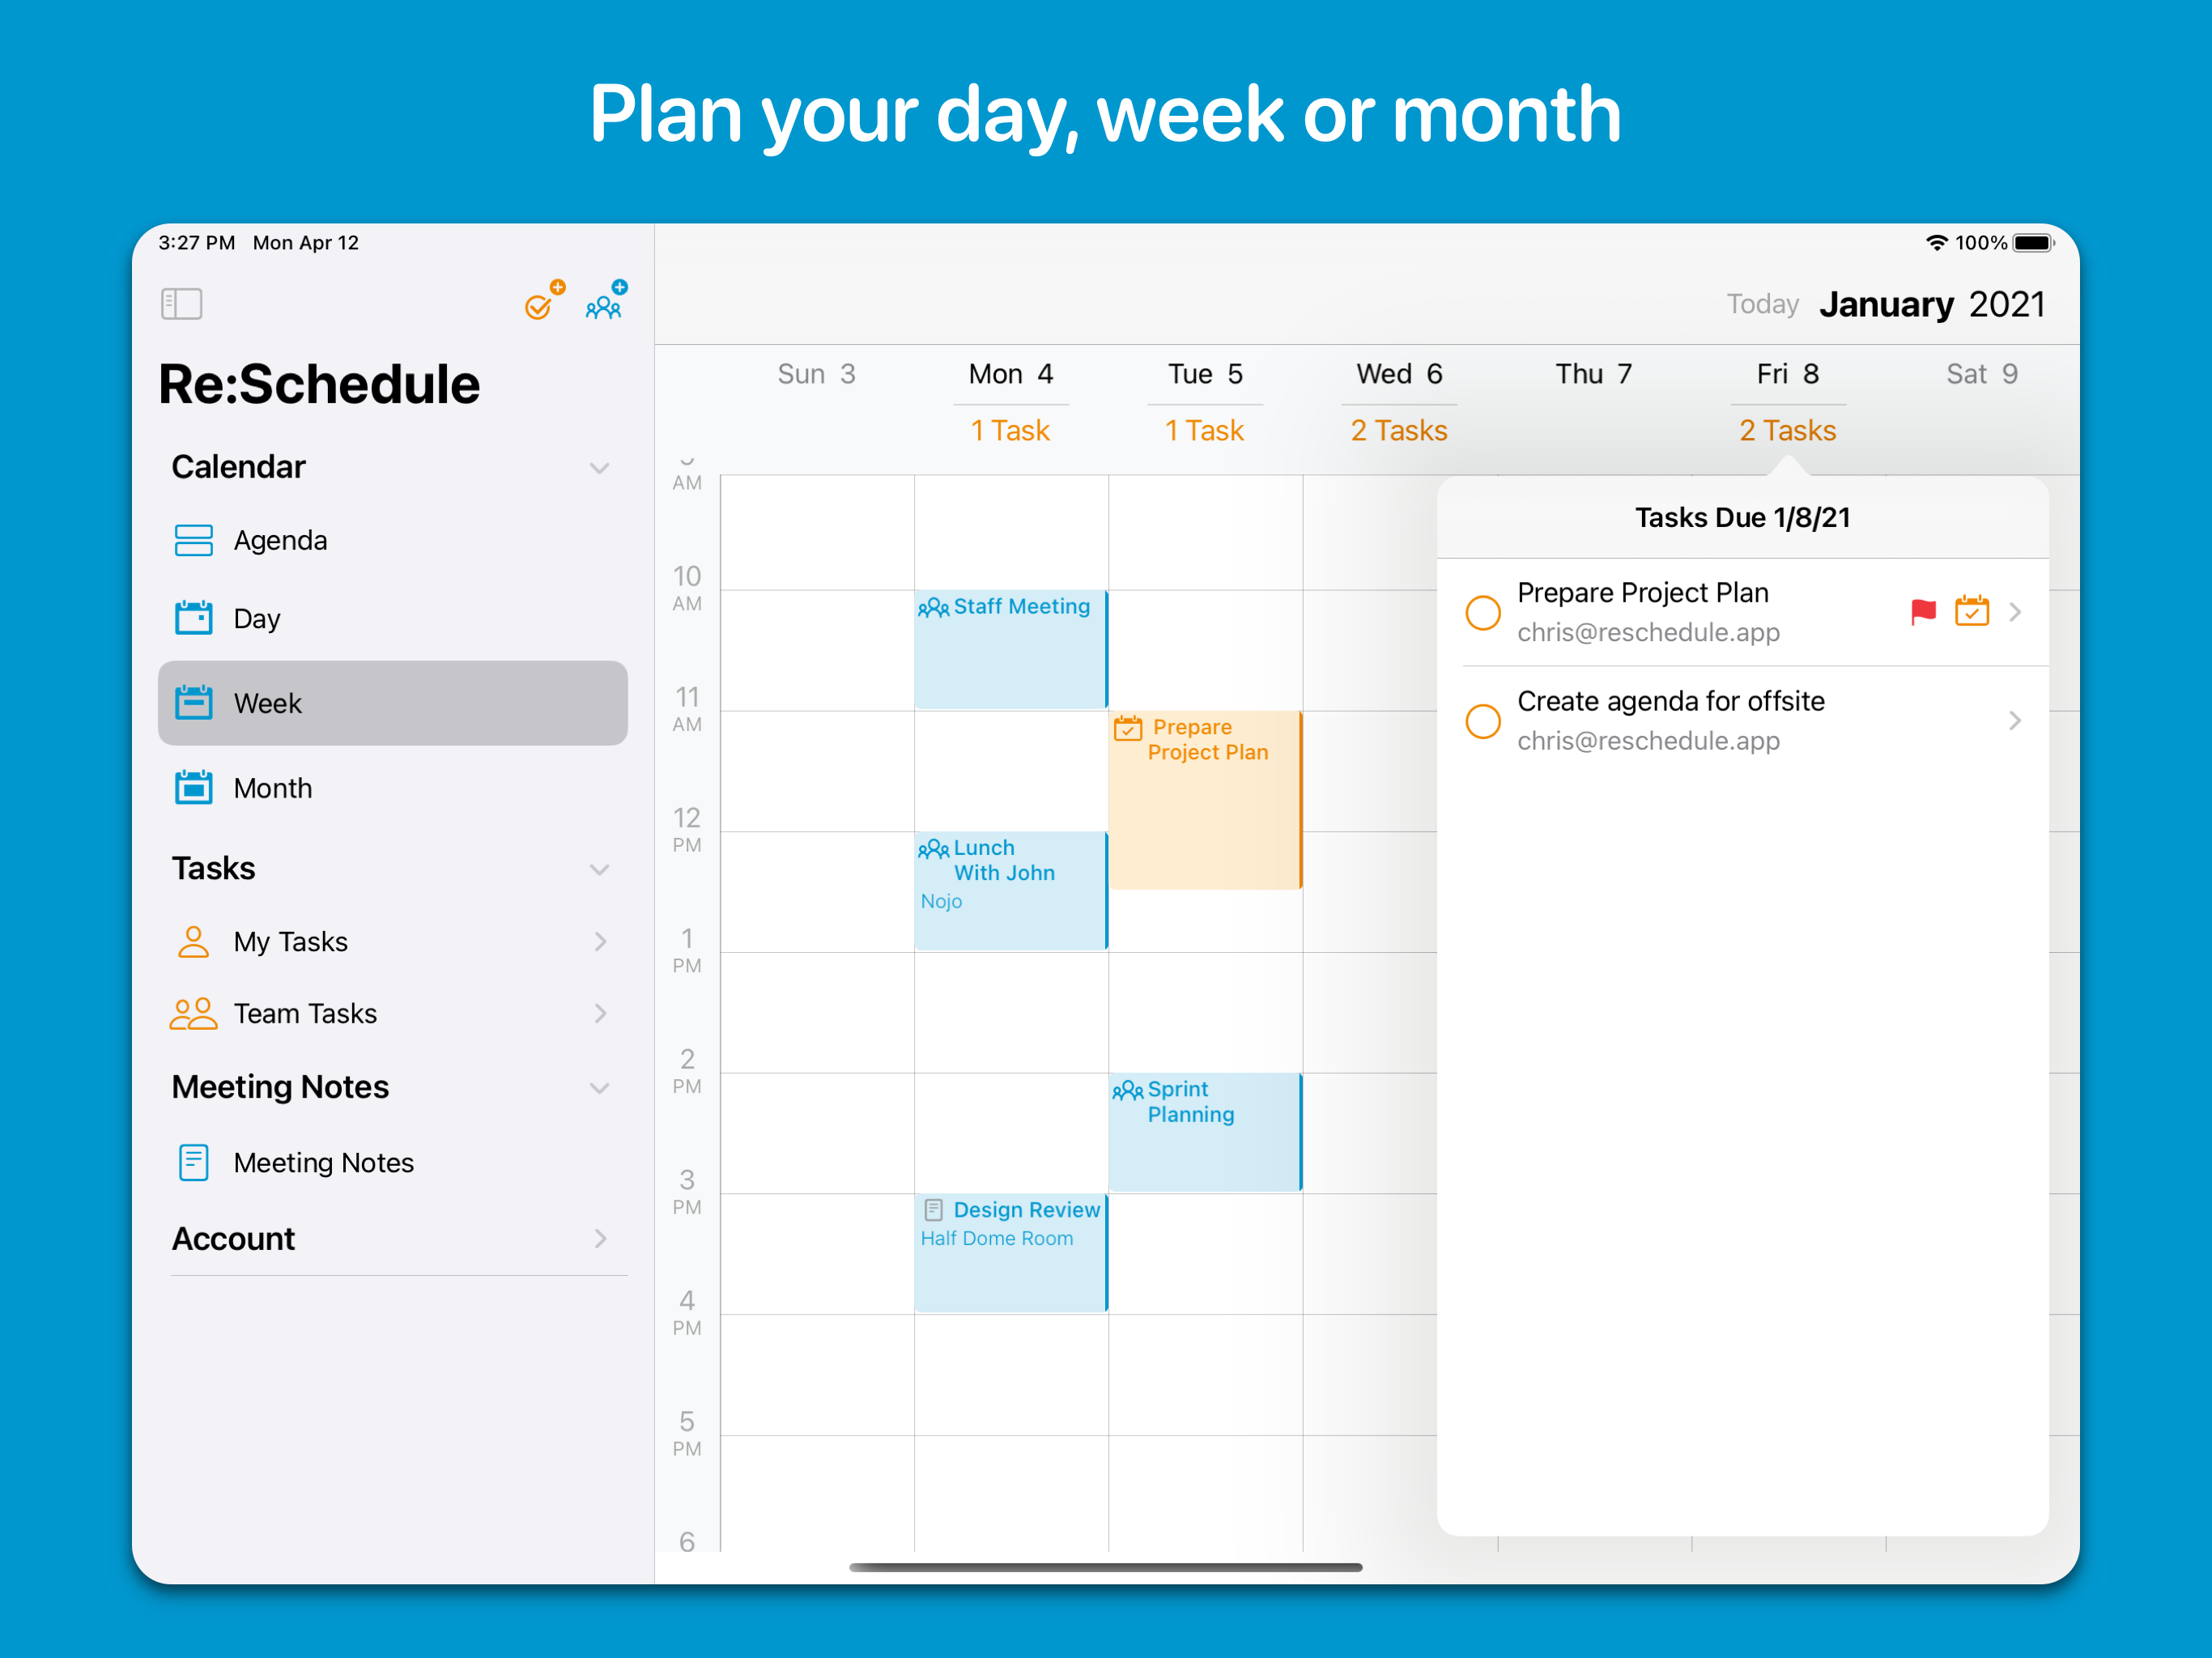 Manage your meetings and tasks in one location to optimize your time